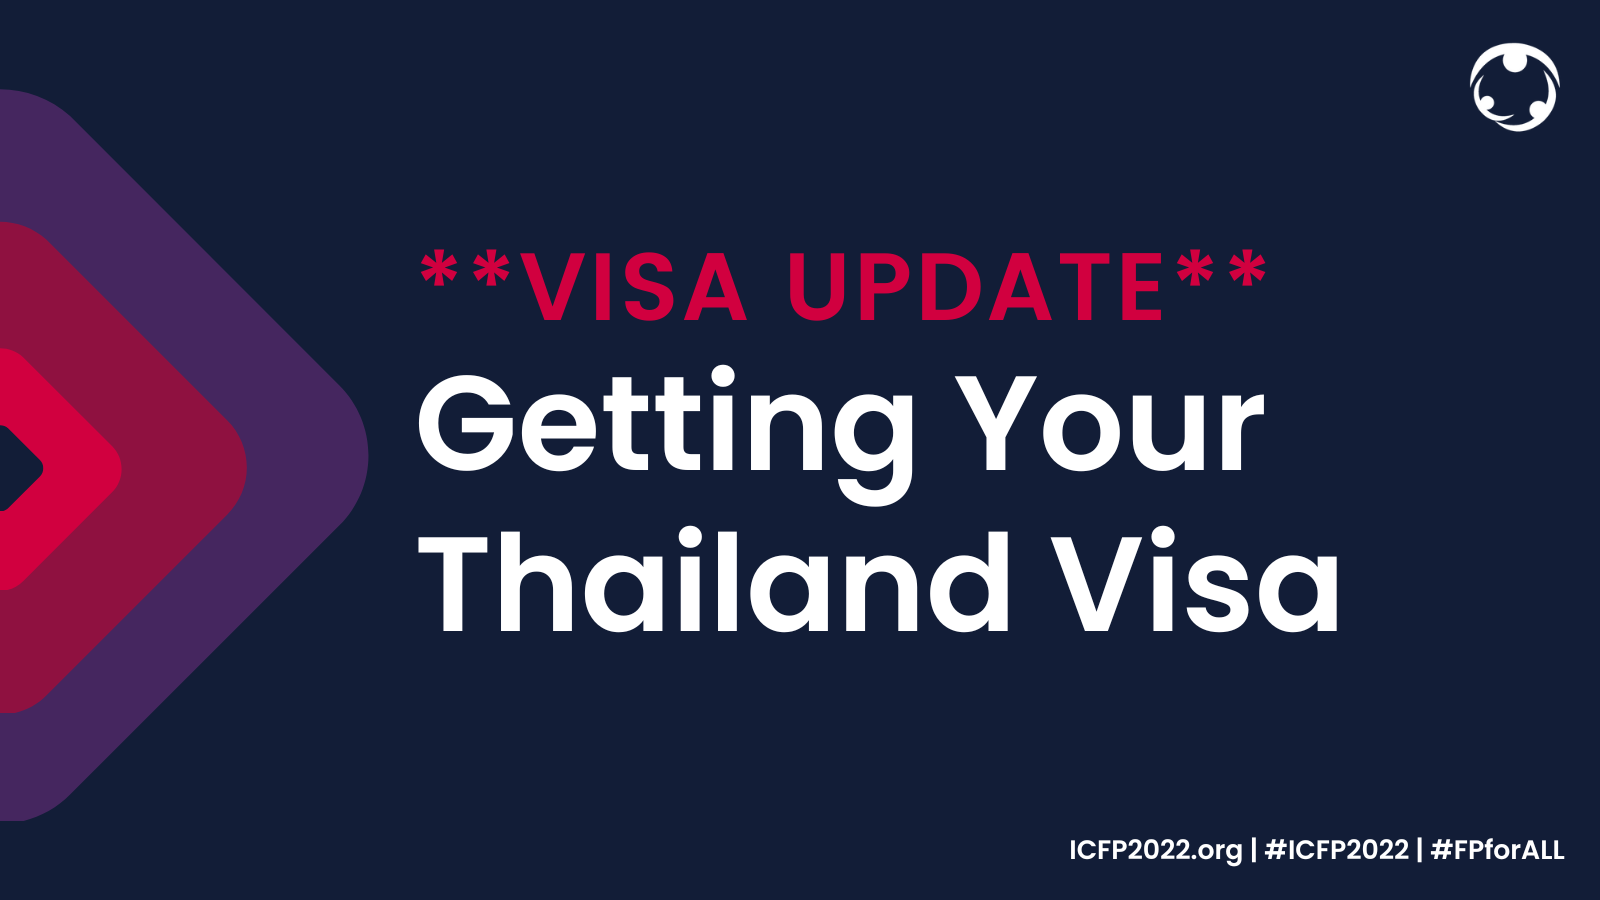 New ICFP2022 “Getting Your Thailand Visa” Page Now Available